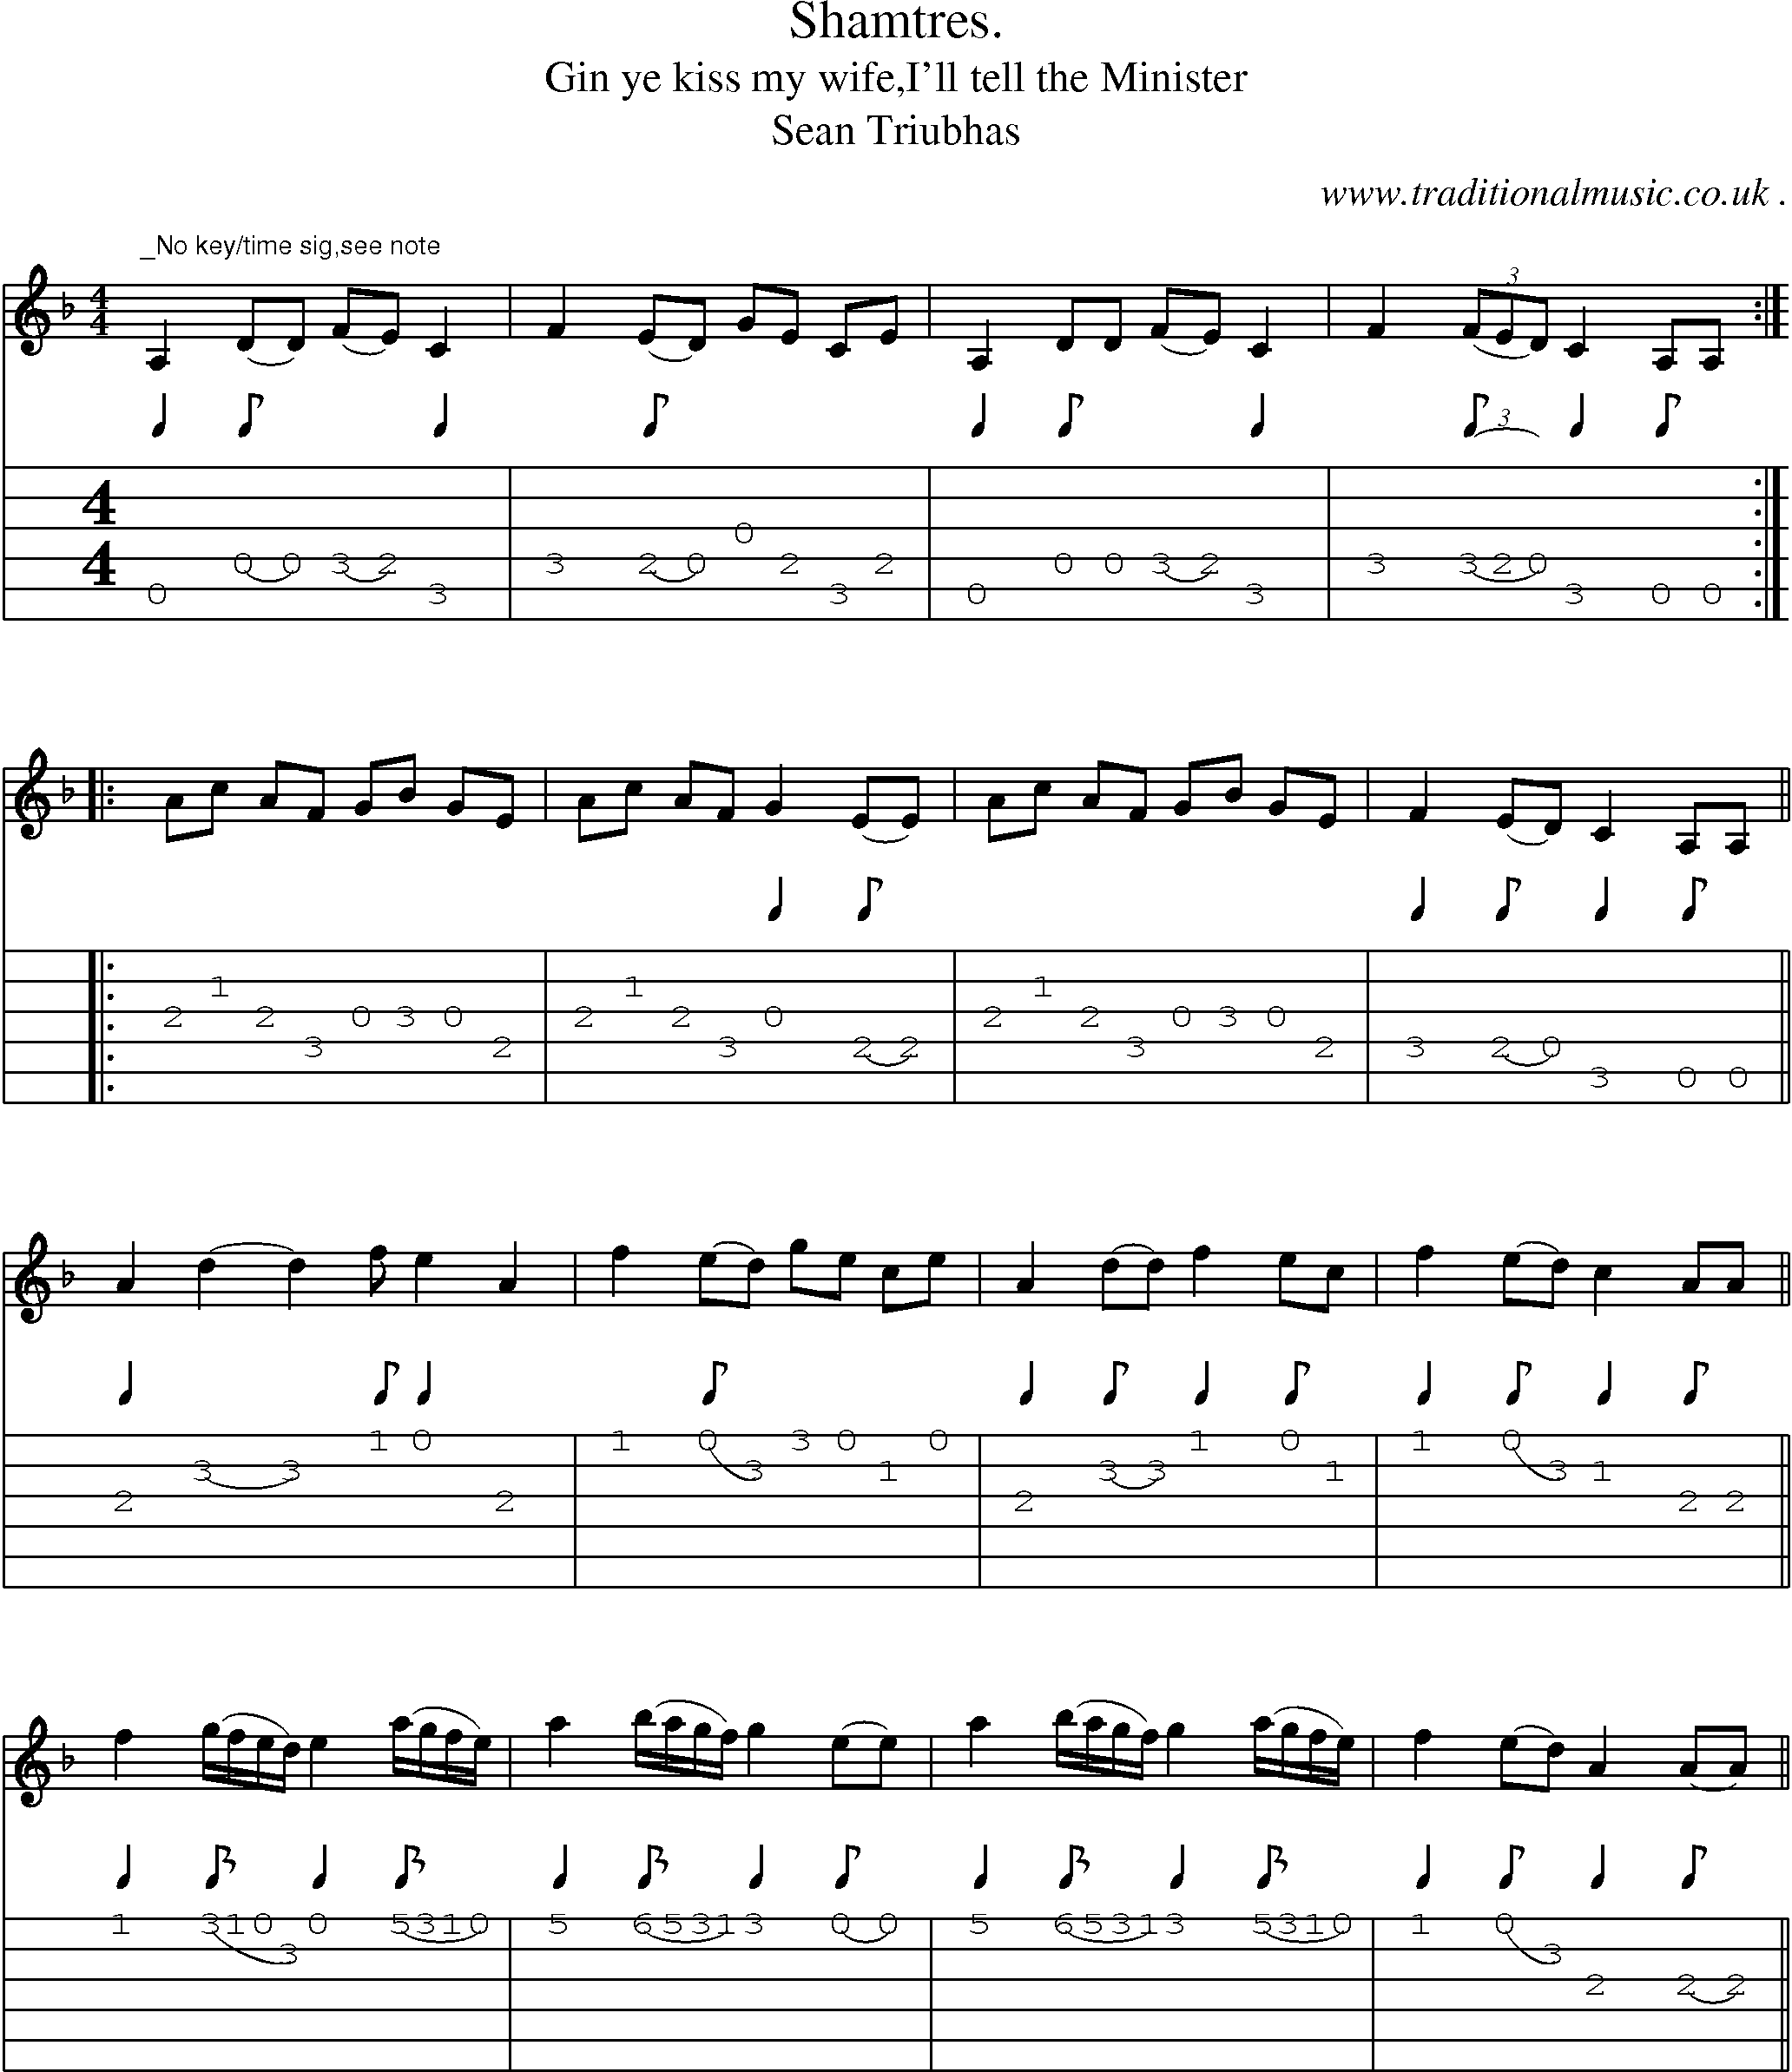 Sheet-Music and Guitar Tabs for Shamtres